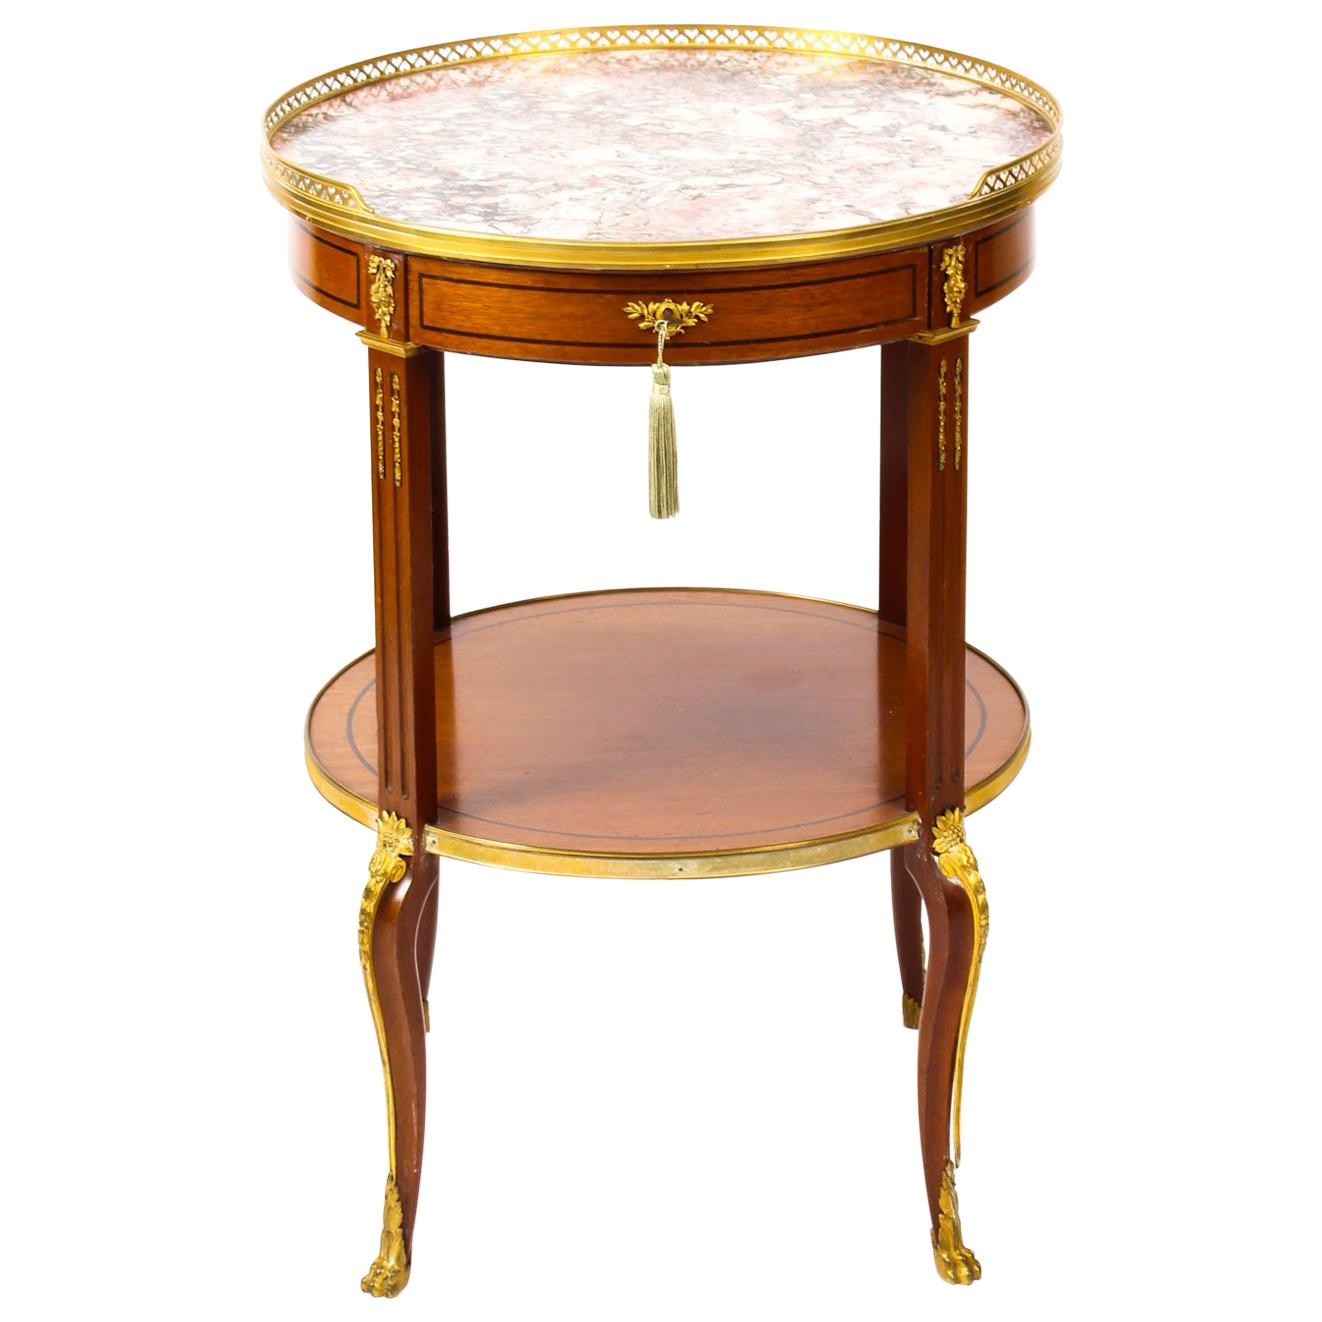 Antique French Louis Revival Marble and Ormolu Occasional Table, 19th Century